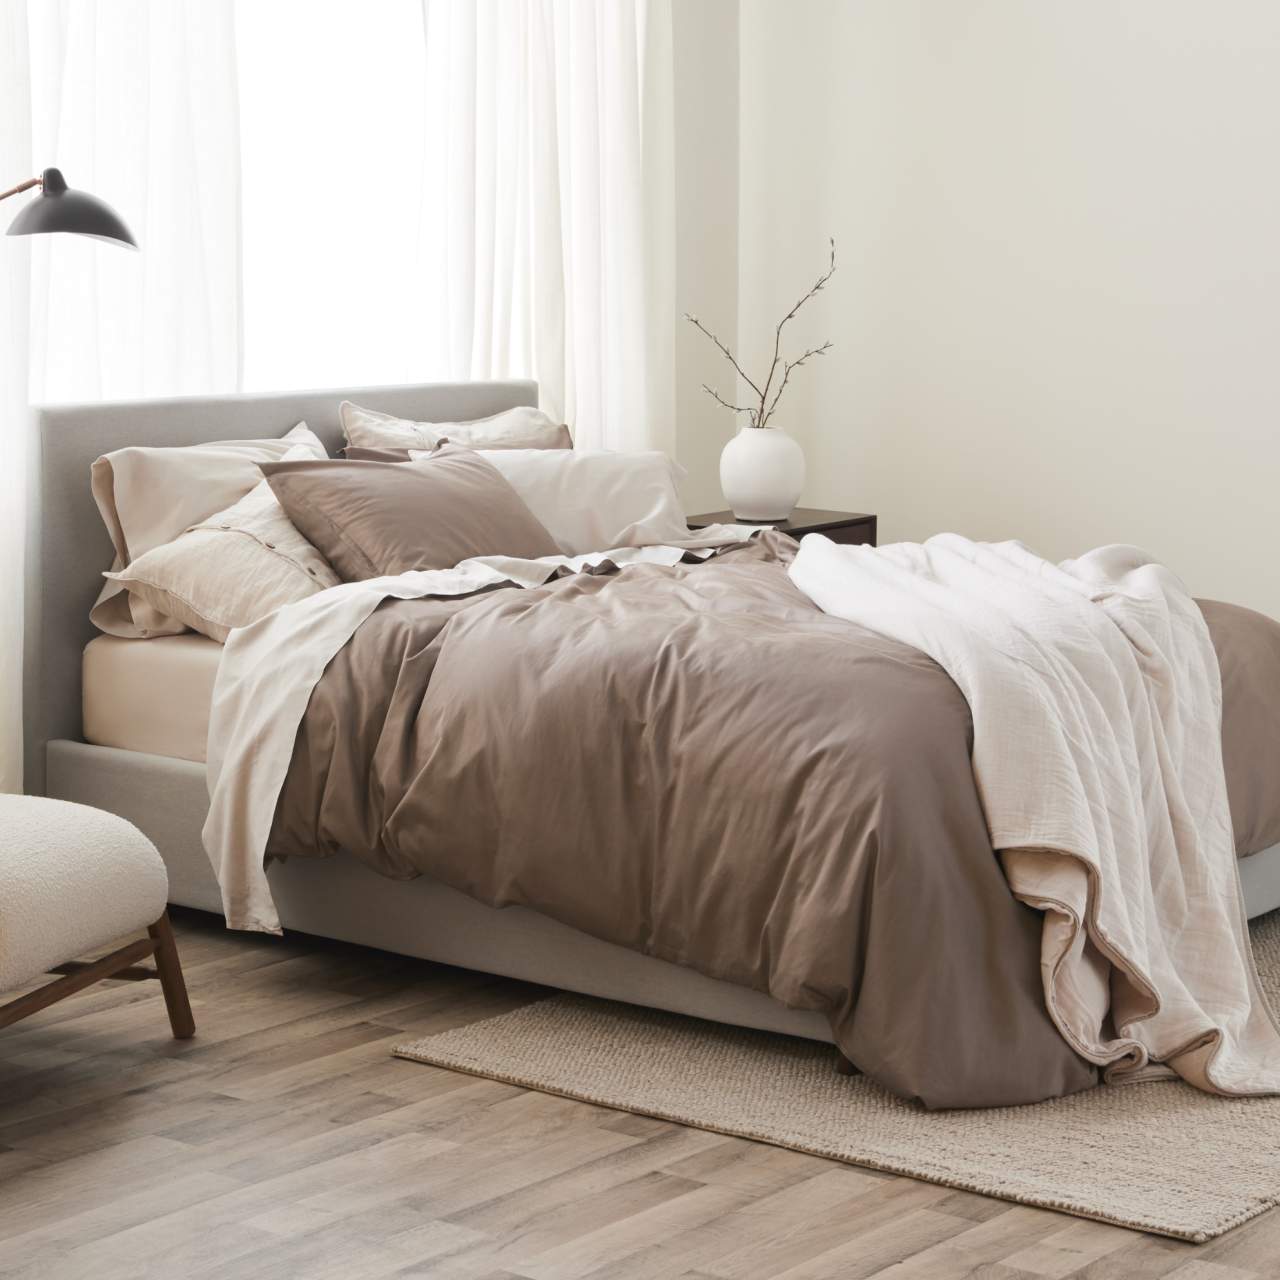 Buy Online cotton bedding products from Cotton Comfort Bedding